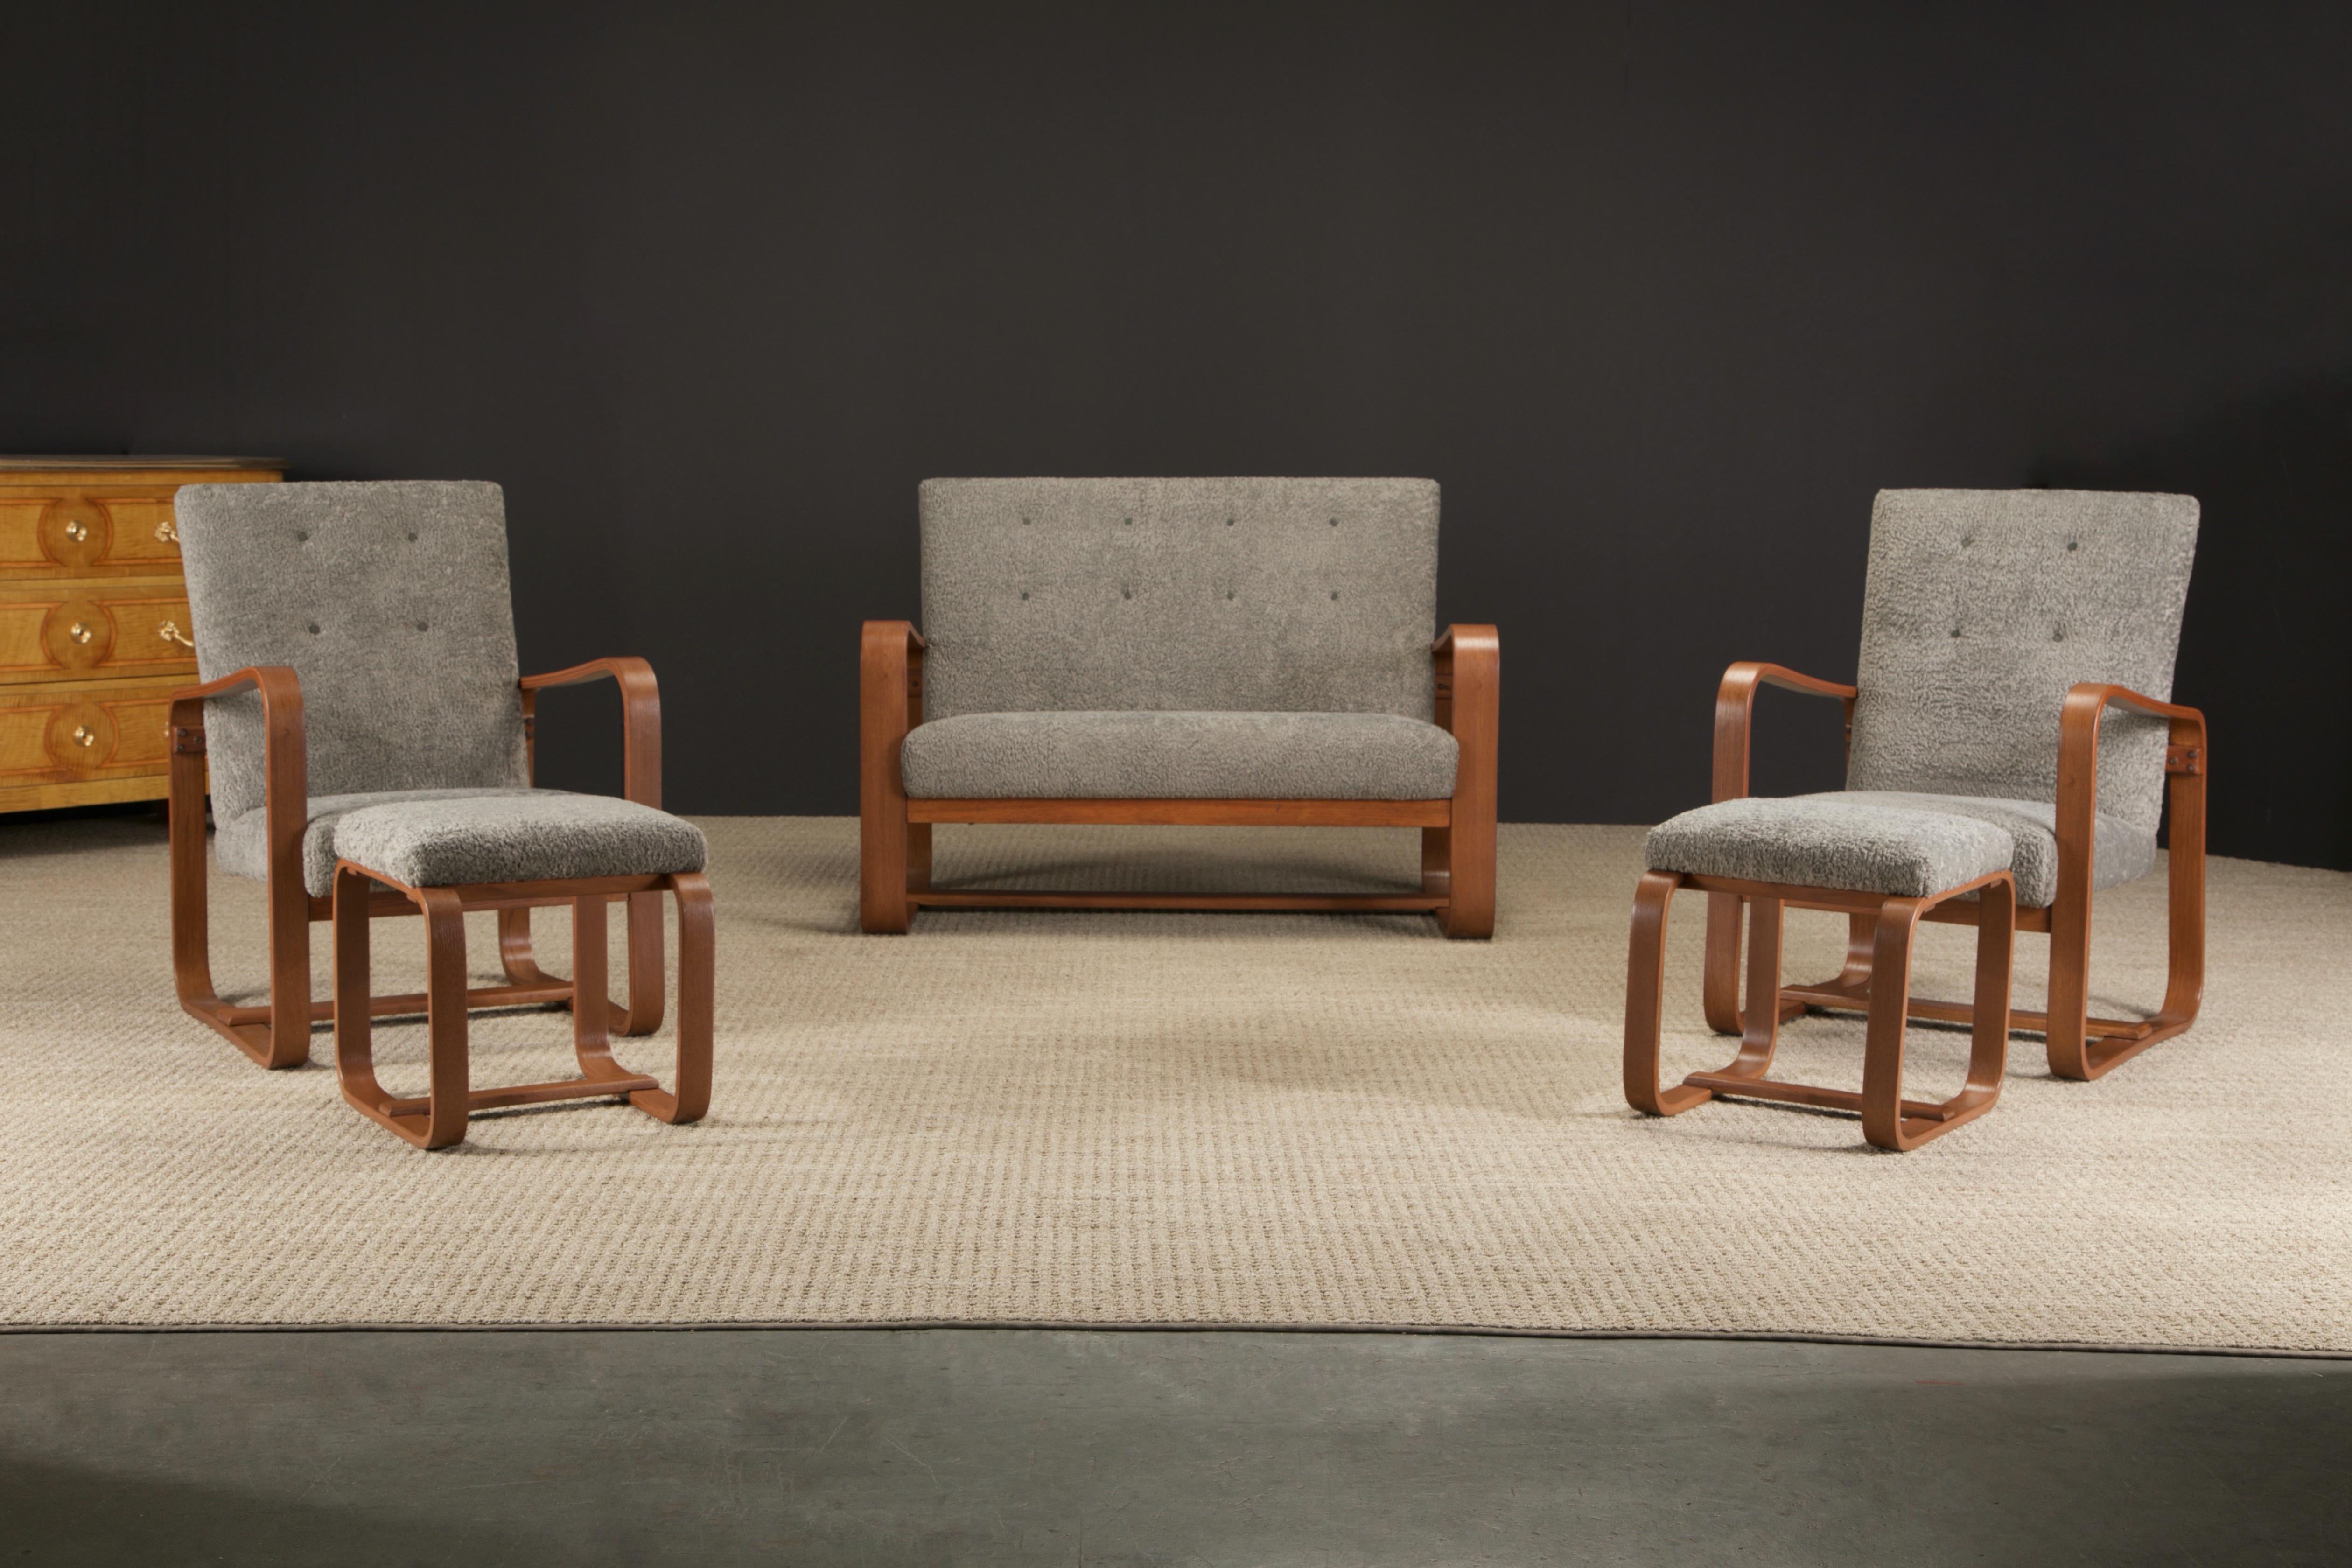 This rare five-piece (5) living room suite by Giuseppi Pagano, designed in 1939 for Bocconi University in Milan, is comprised of two oak bentwood upholstered open armchairs with ottomans and a settee. 

This set was recently restored, the oak